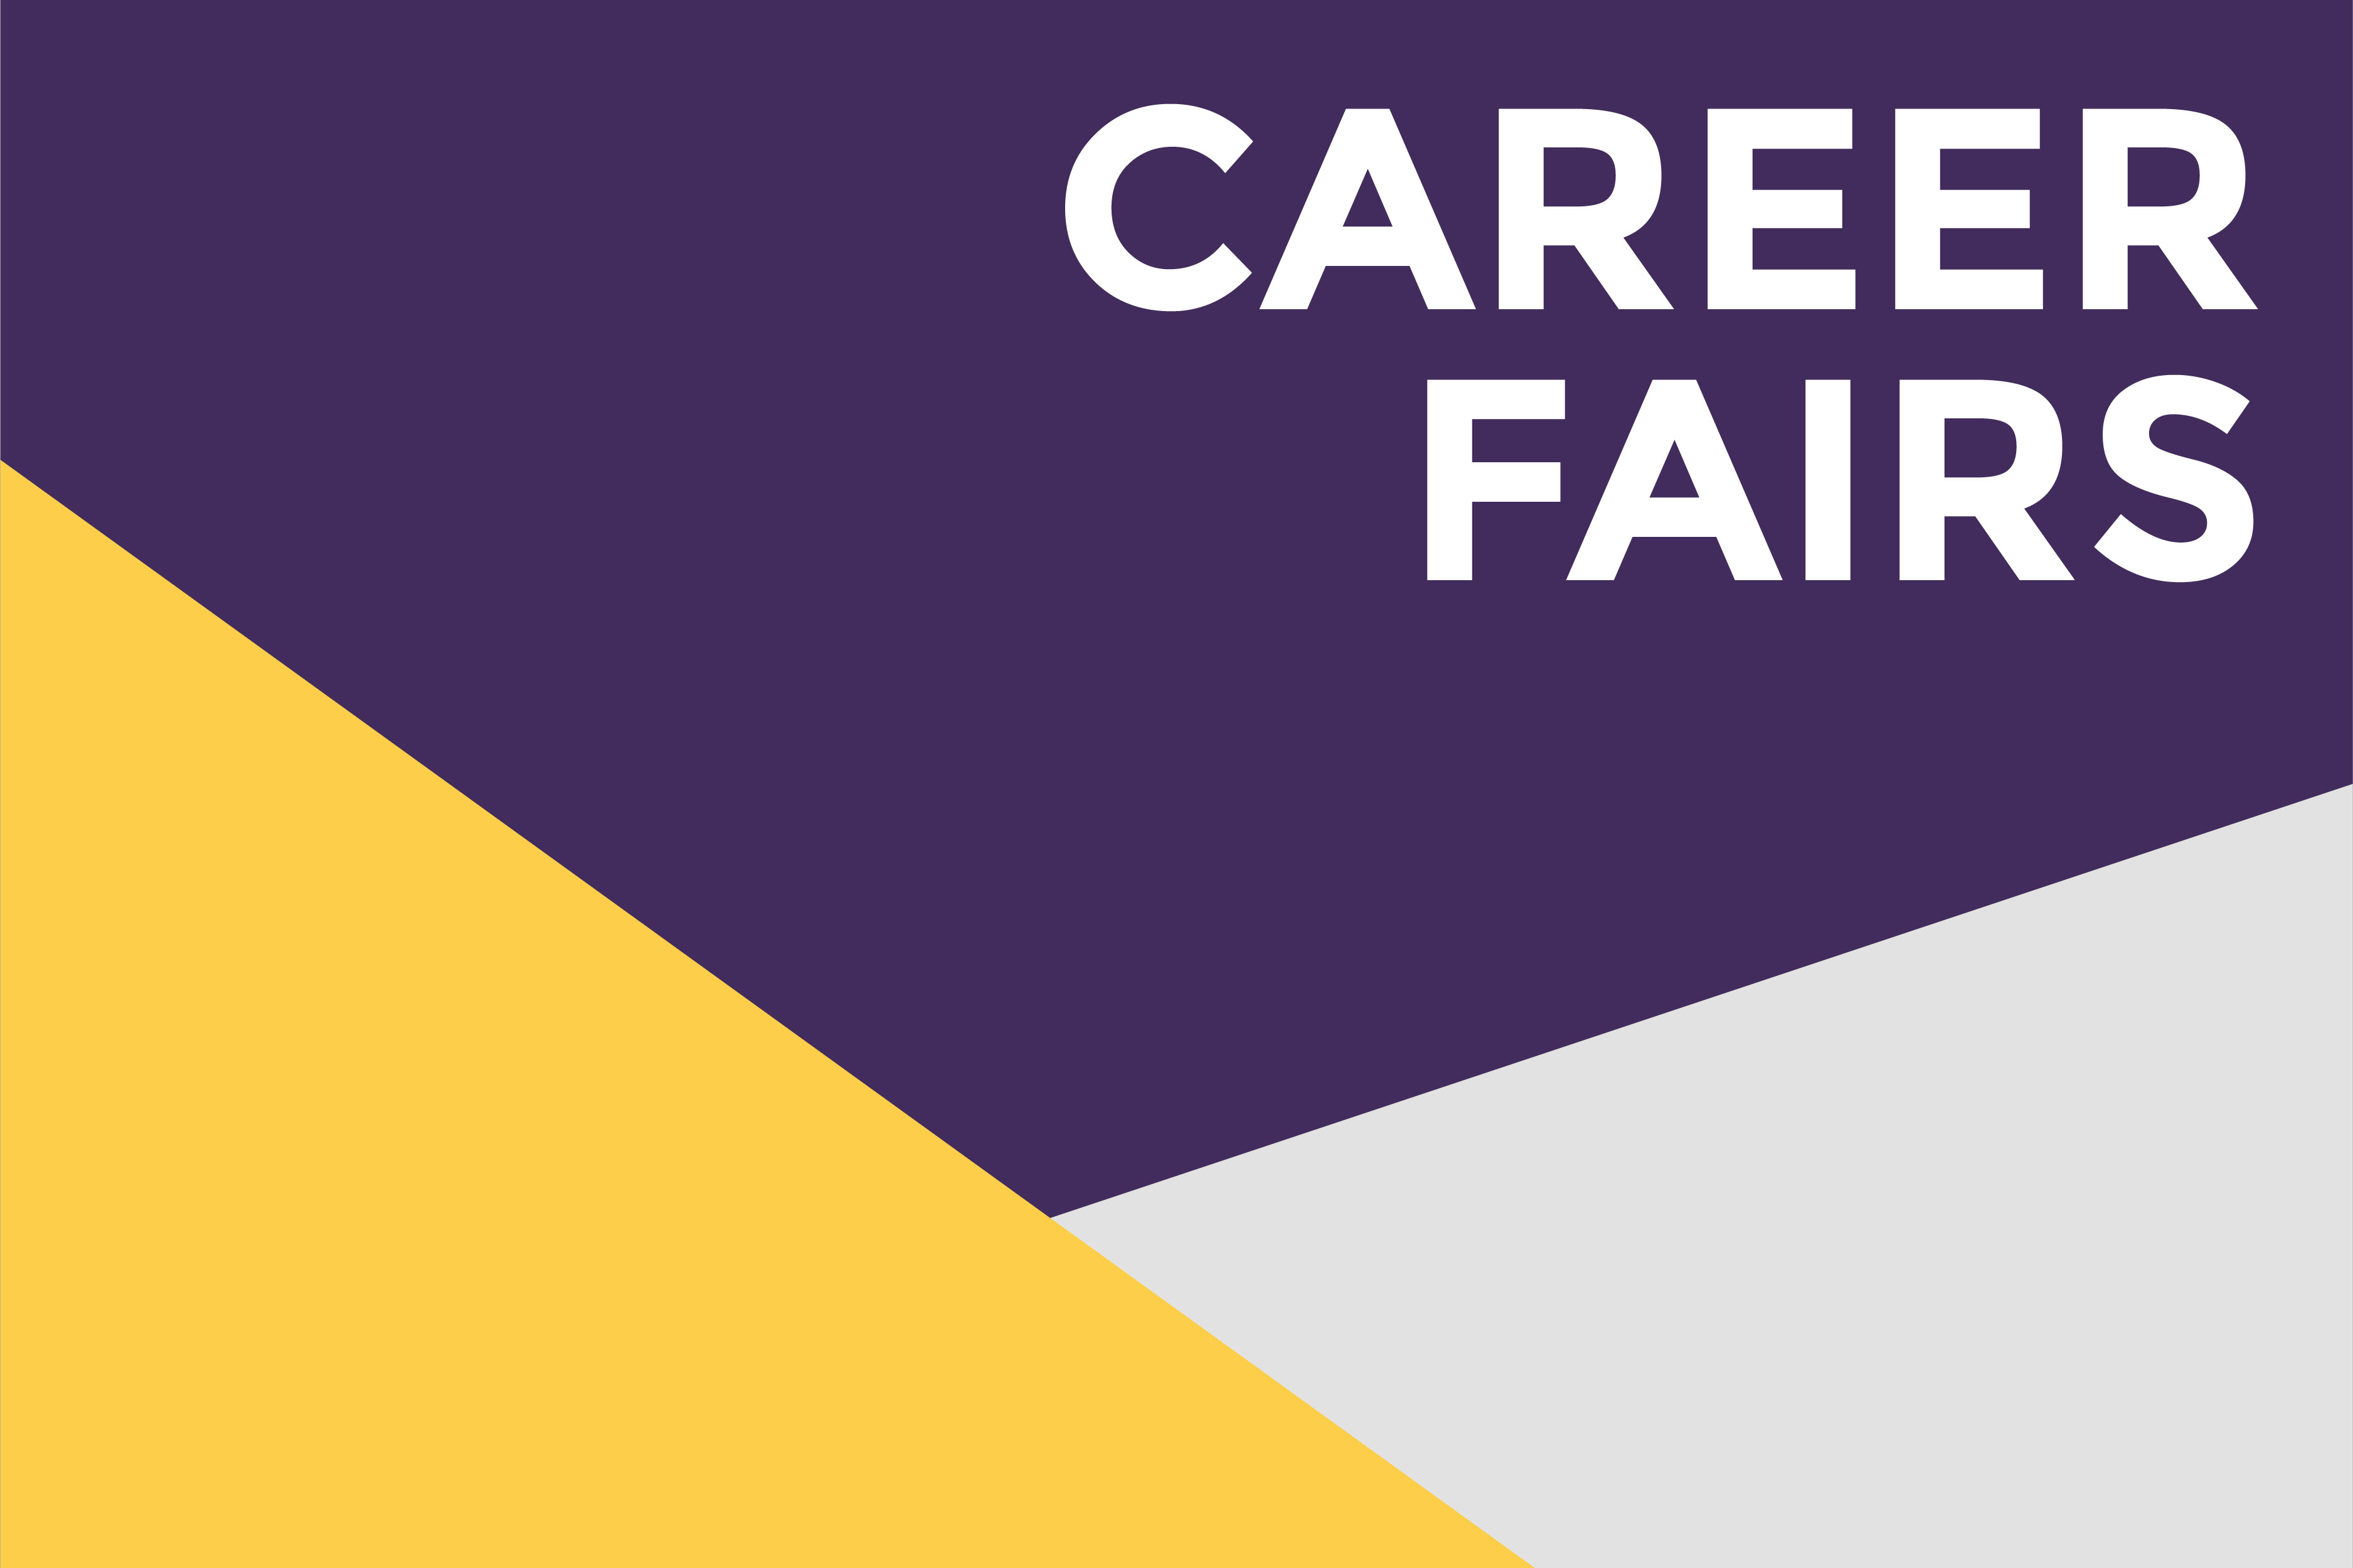 Career fairs at UW-Whitewater